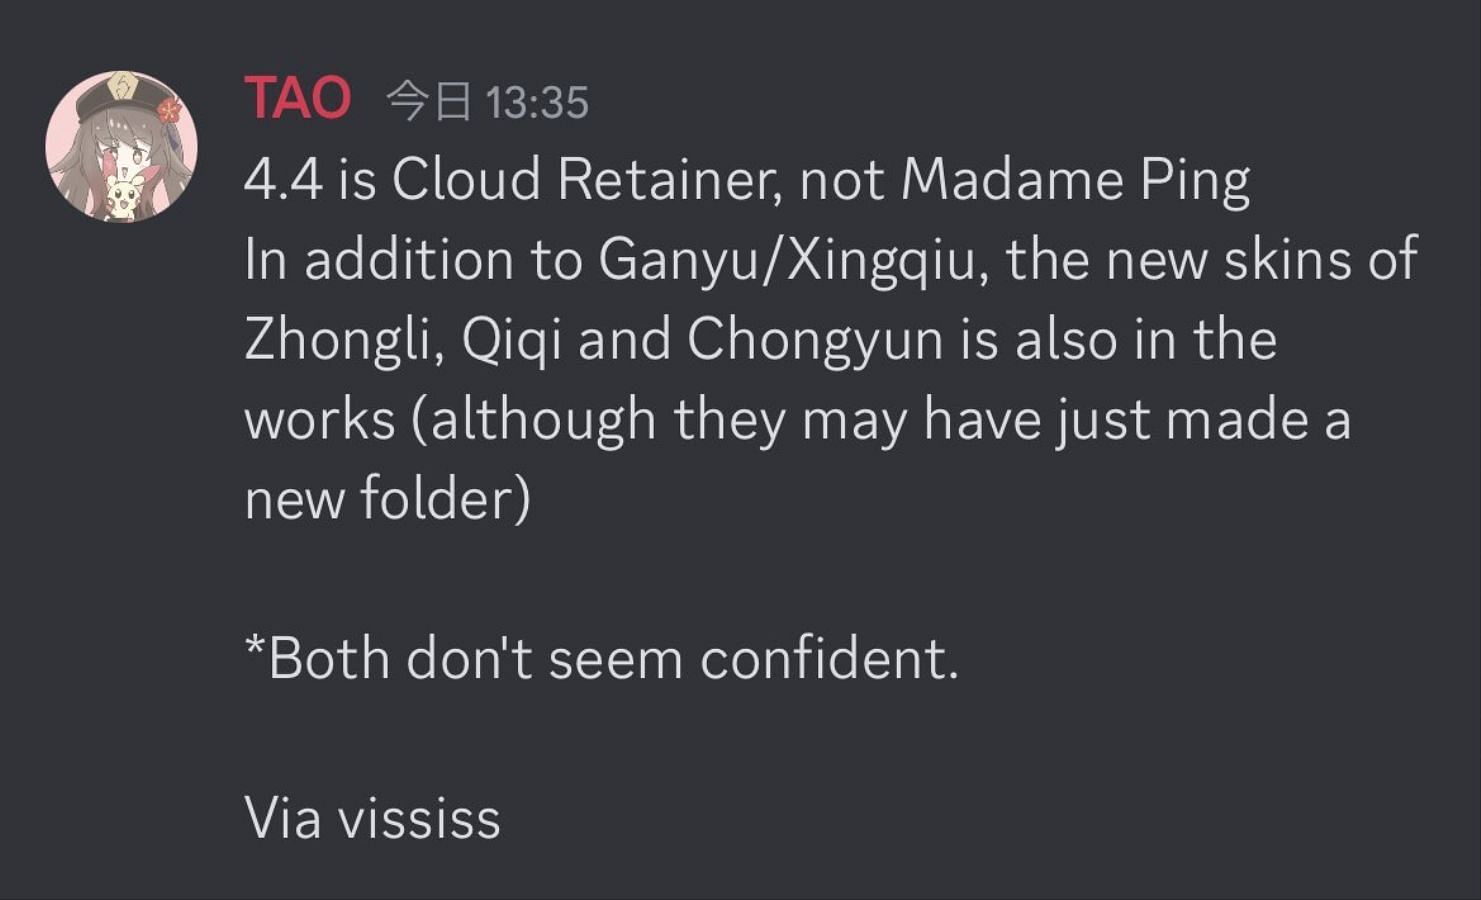 Cloud Retainer will be released in 4.4, claims Vississ. (Image via Tao)